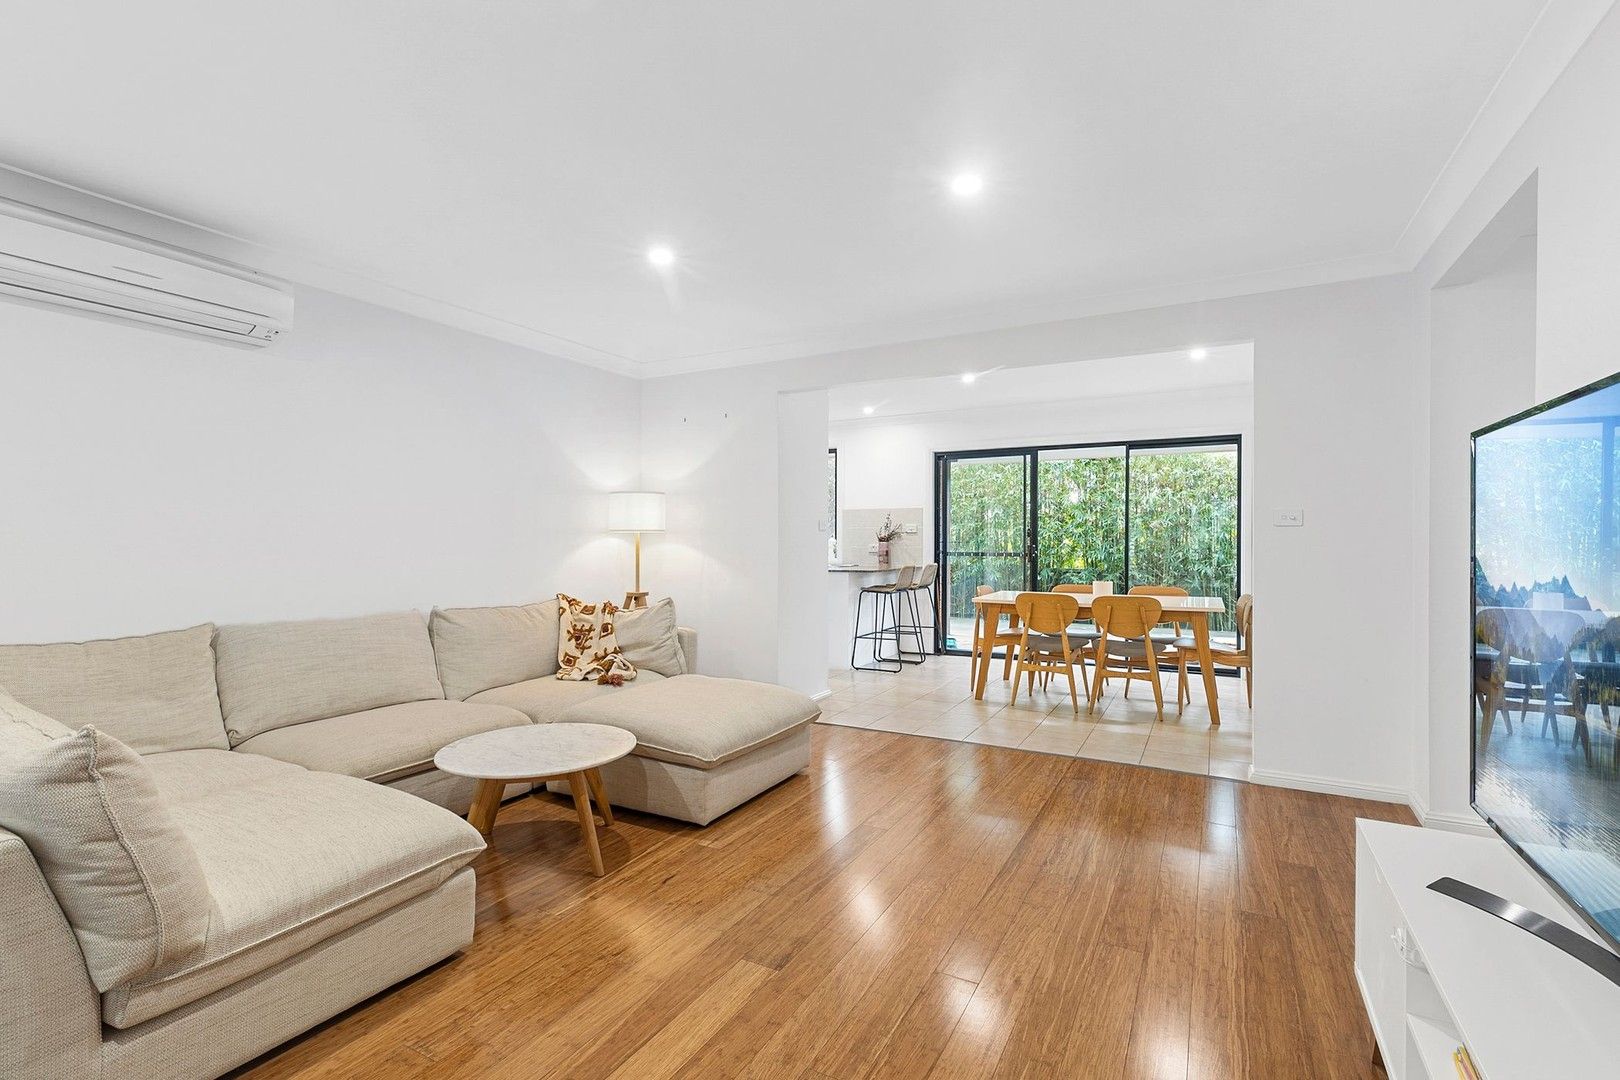 2 bedrooms Villa in 2/113 Gannons Road CARINGBAH SOUTH NSW, 2229